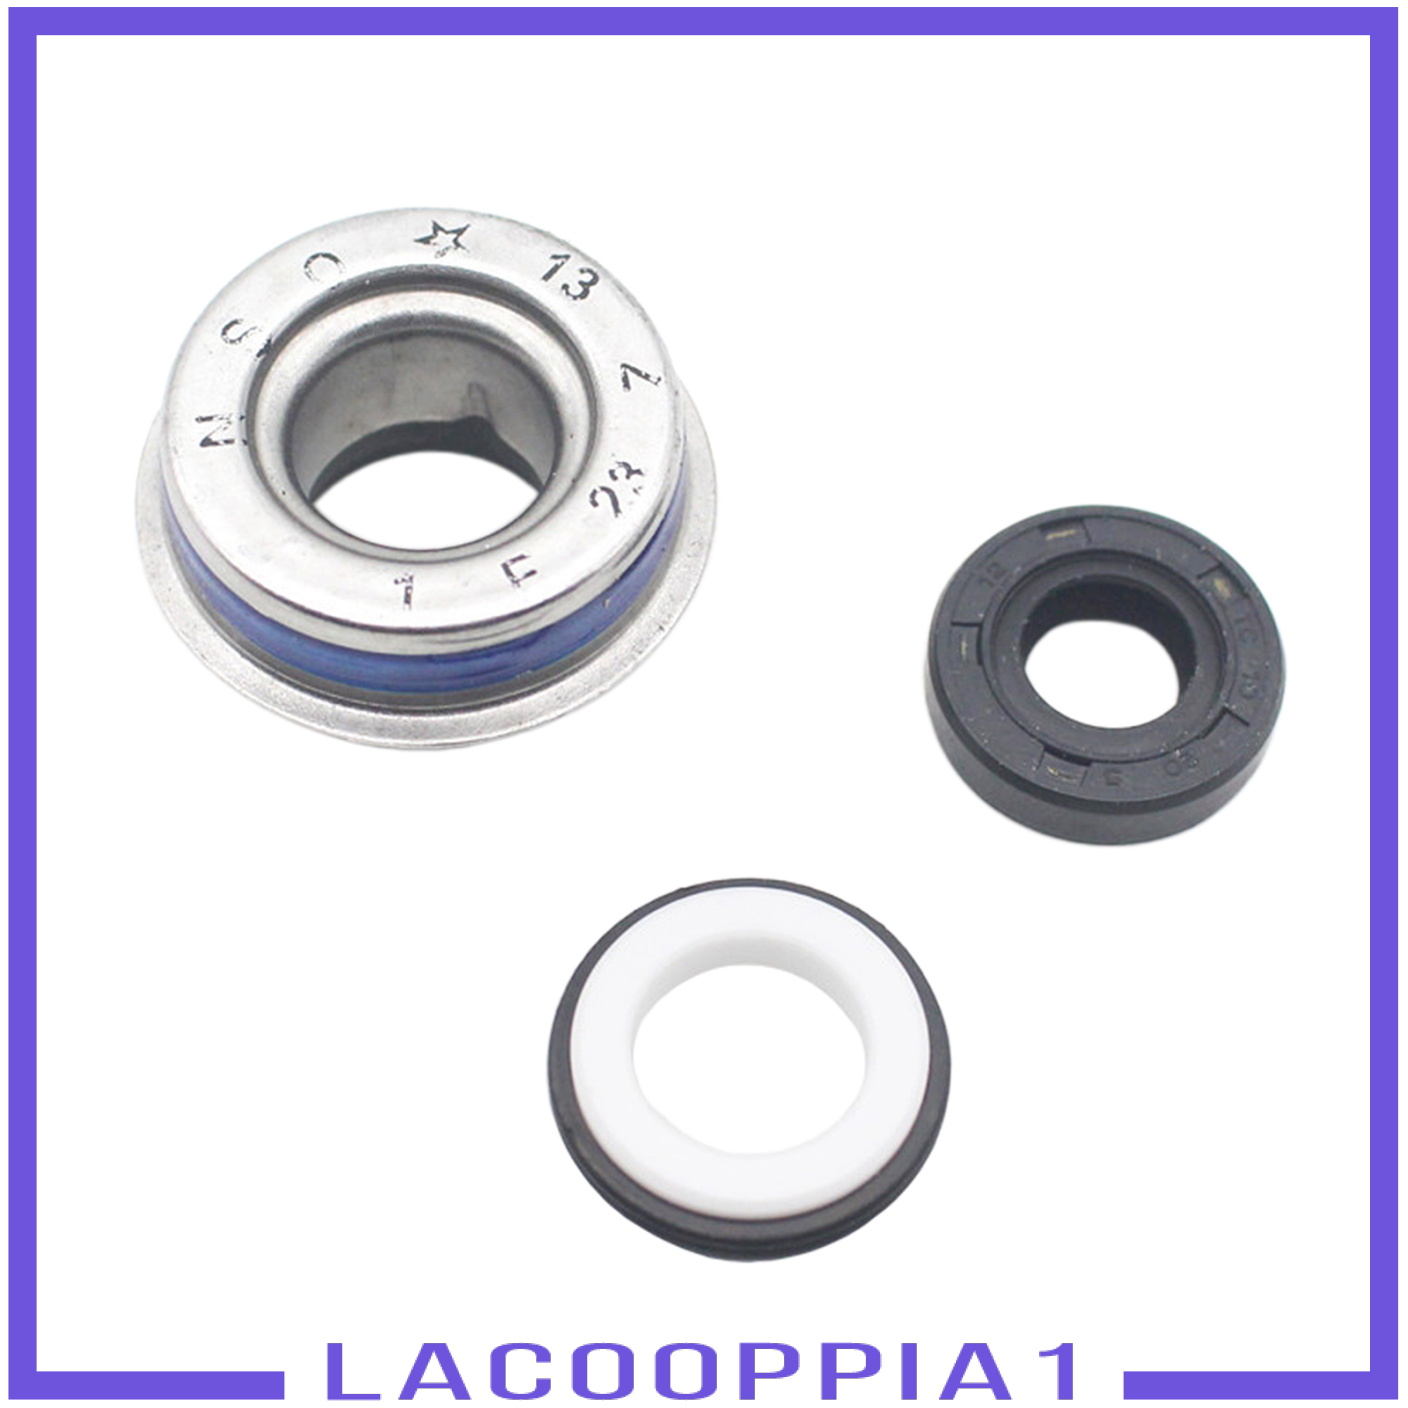 [LACOOPPIA1]Water Pump Oil Seal Shock Absorber Oil Seals Set For Honda NSR250 P3